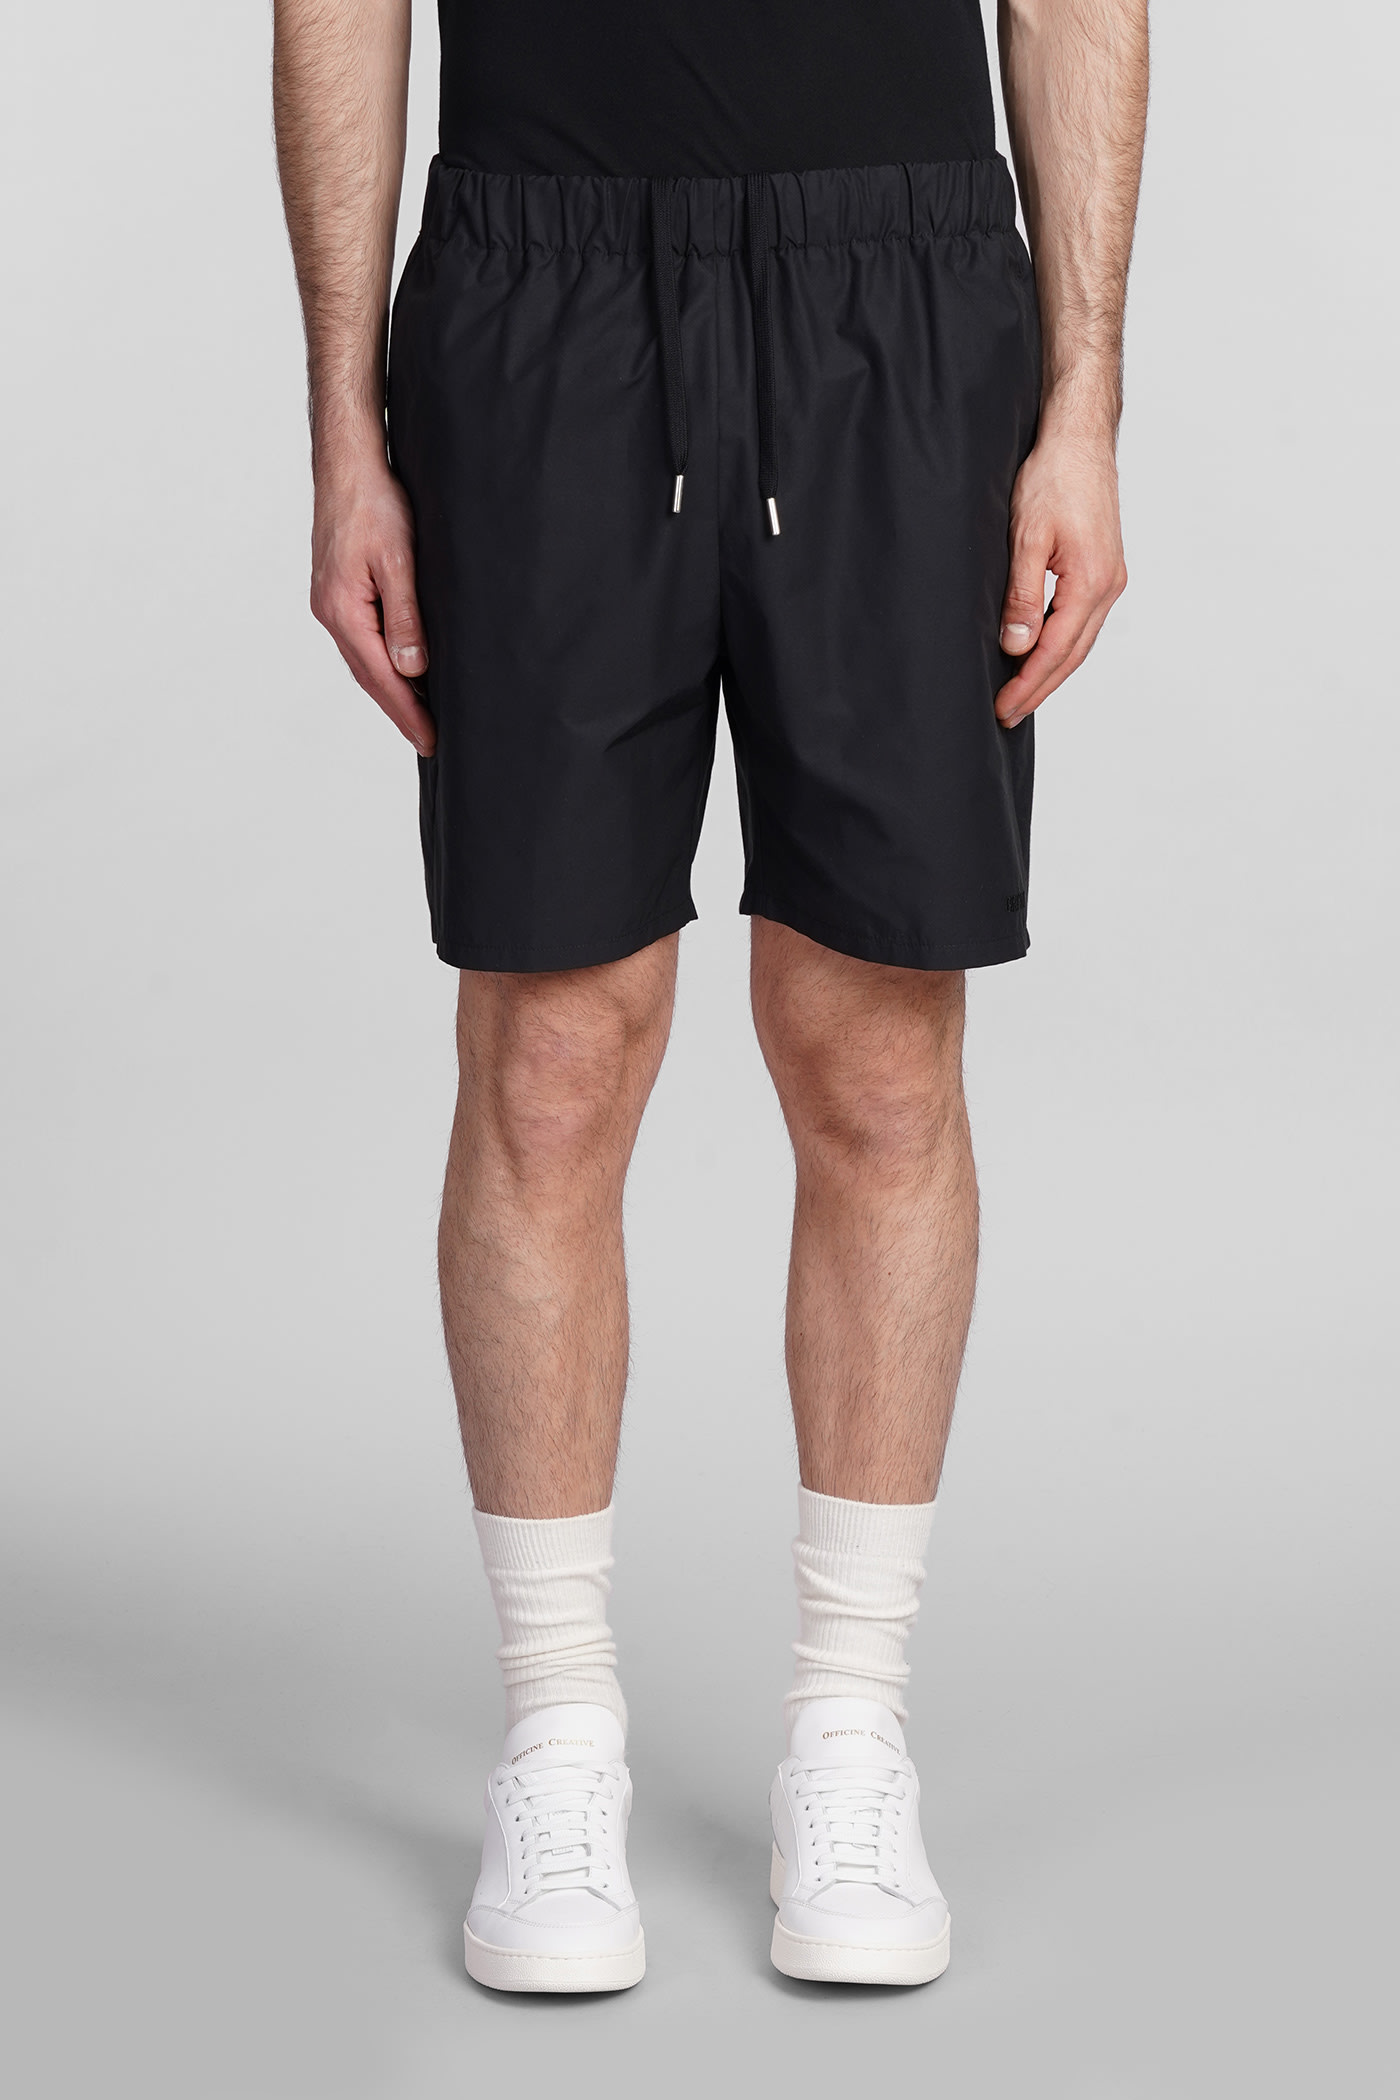 Shorts In Black Cotton